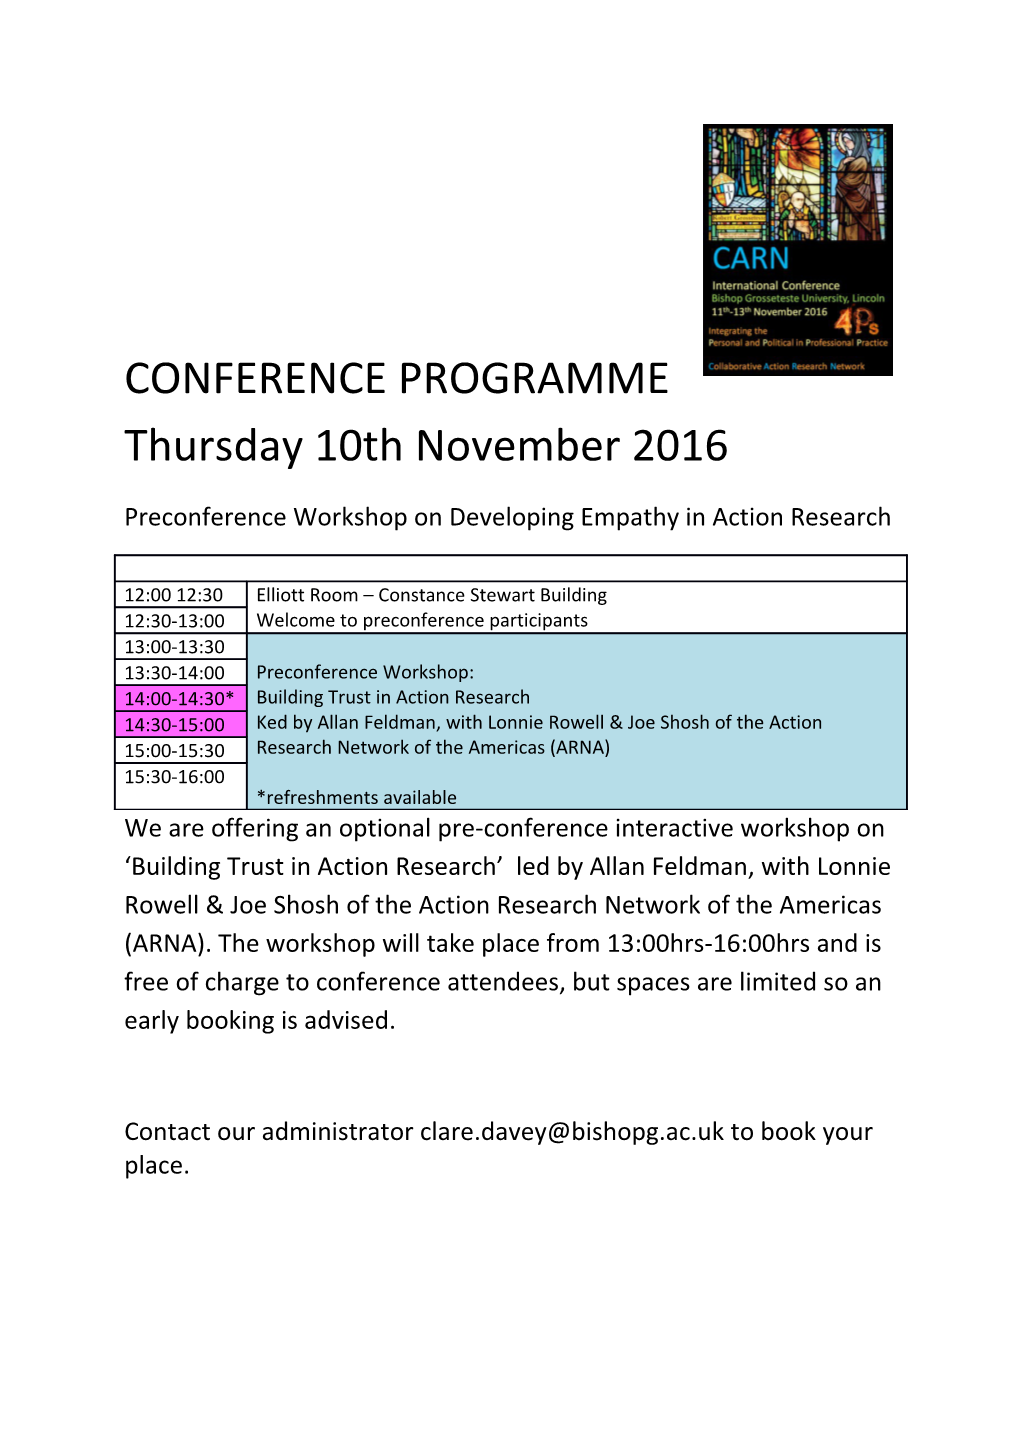 Preconference Workshop on Developing Empathy in Action Research